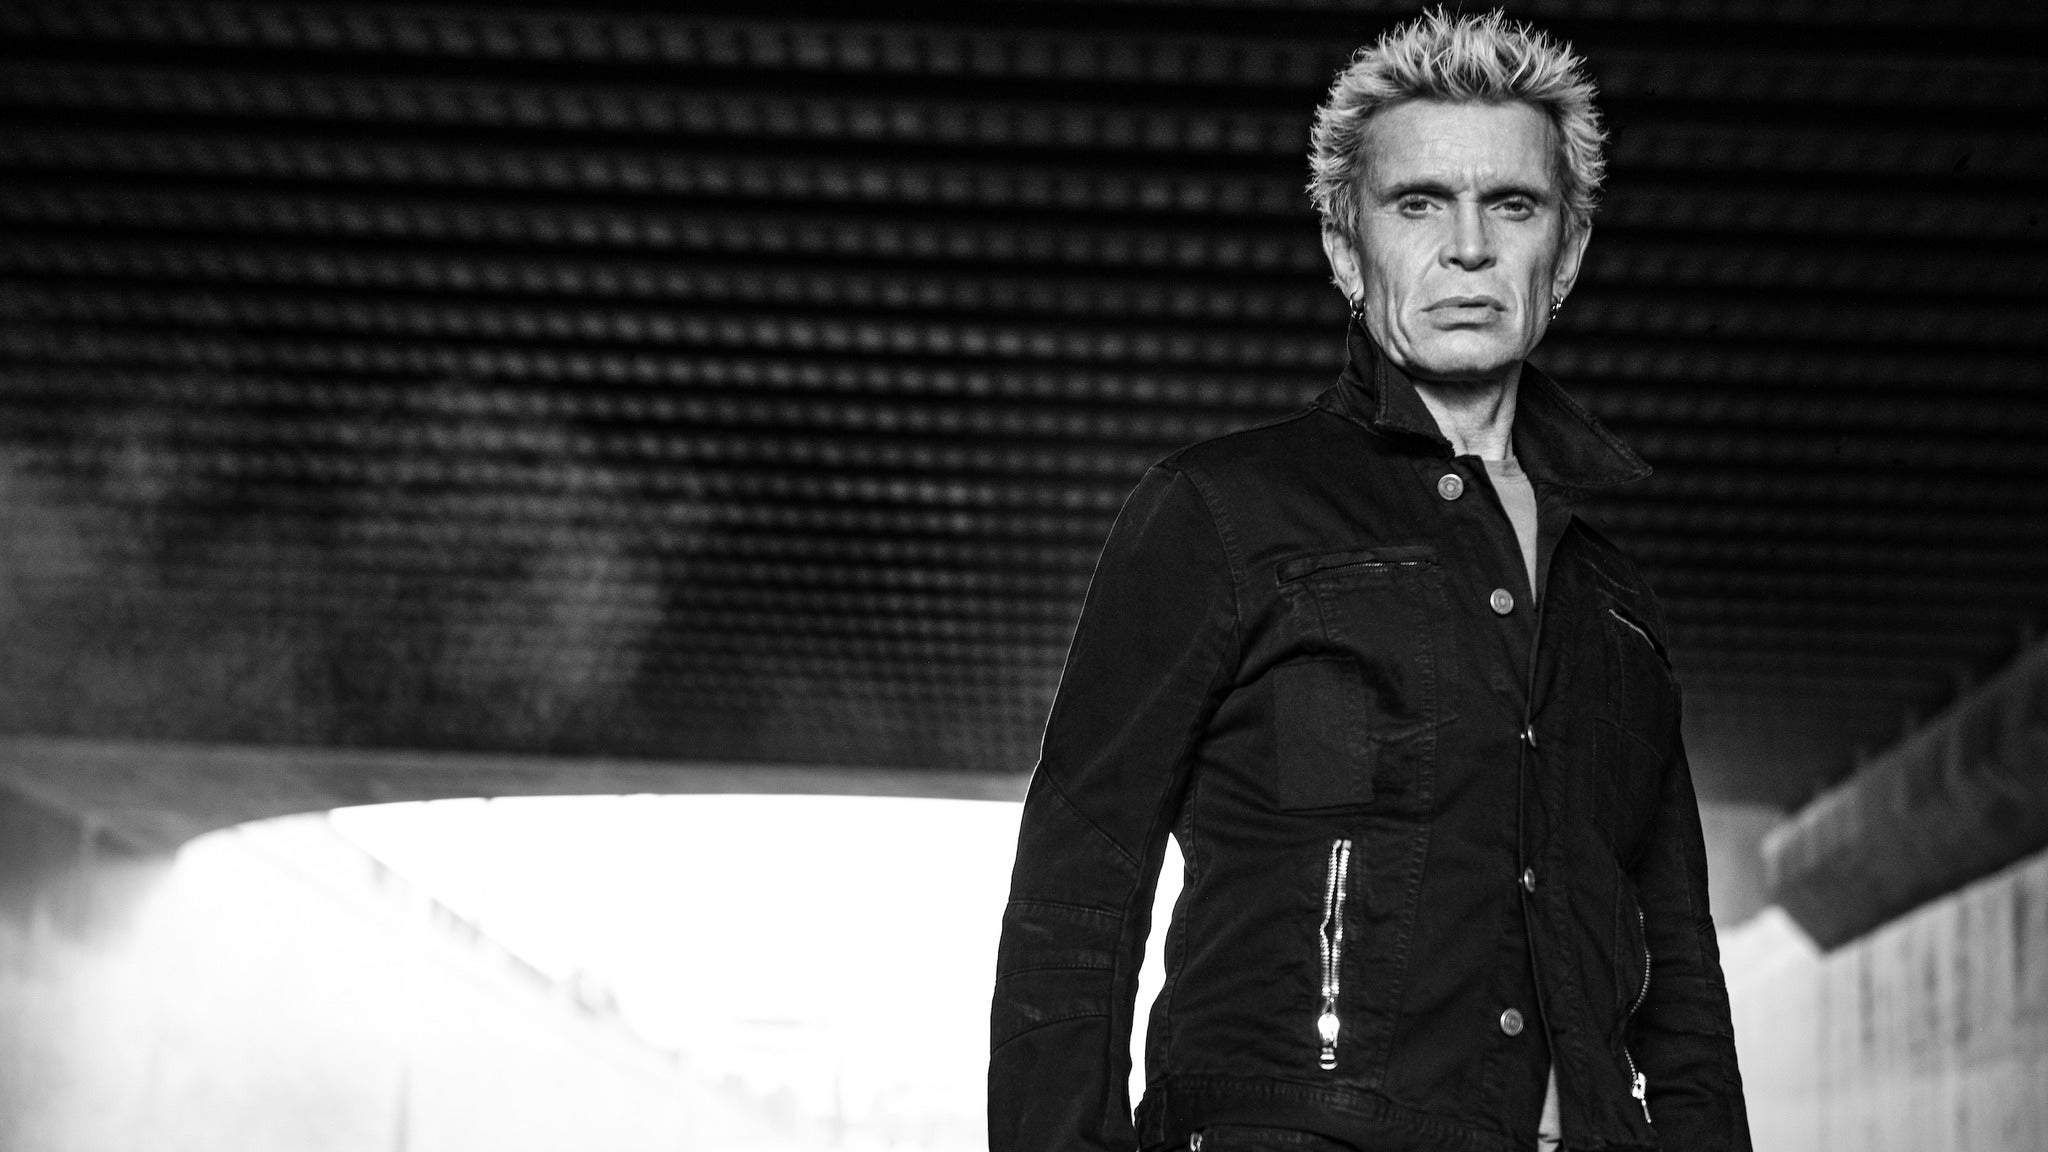 Billy Idol at The Majestic Ventura Theater - CA